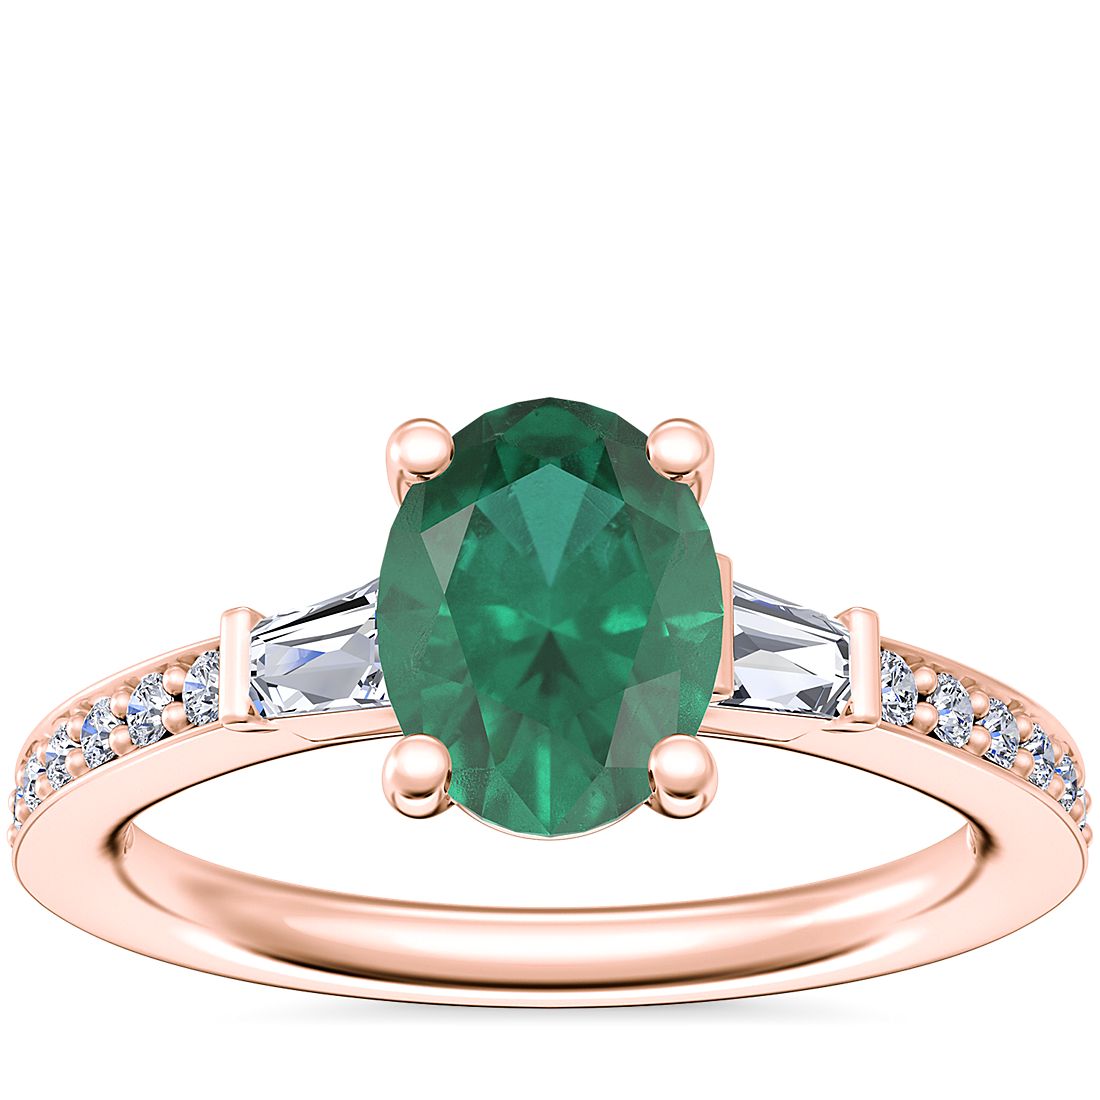 Tapered Baguette Diamond Cathedral Engagement Ring with Oval Emerald in 14k Rose Gold (8x6mm)